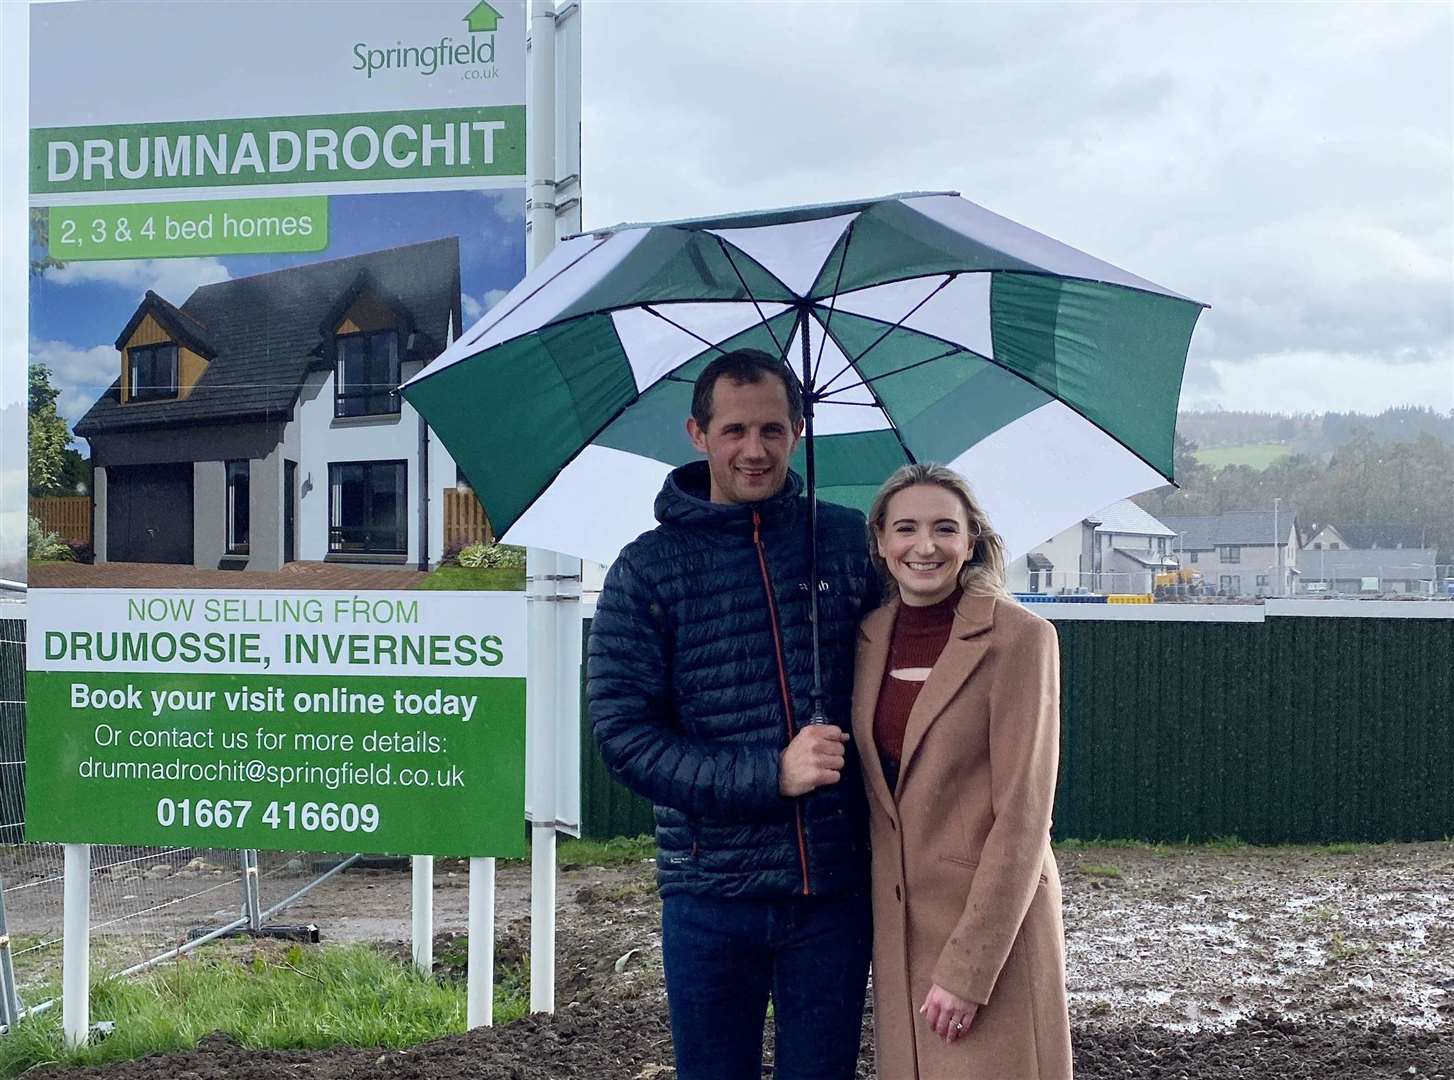 Drumnadrochit couple Katie and Michael are on Springfield's mailing list after expressing interest in buying one of the rejected 47 homes in the builders' latest proposal.